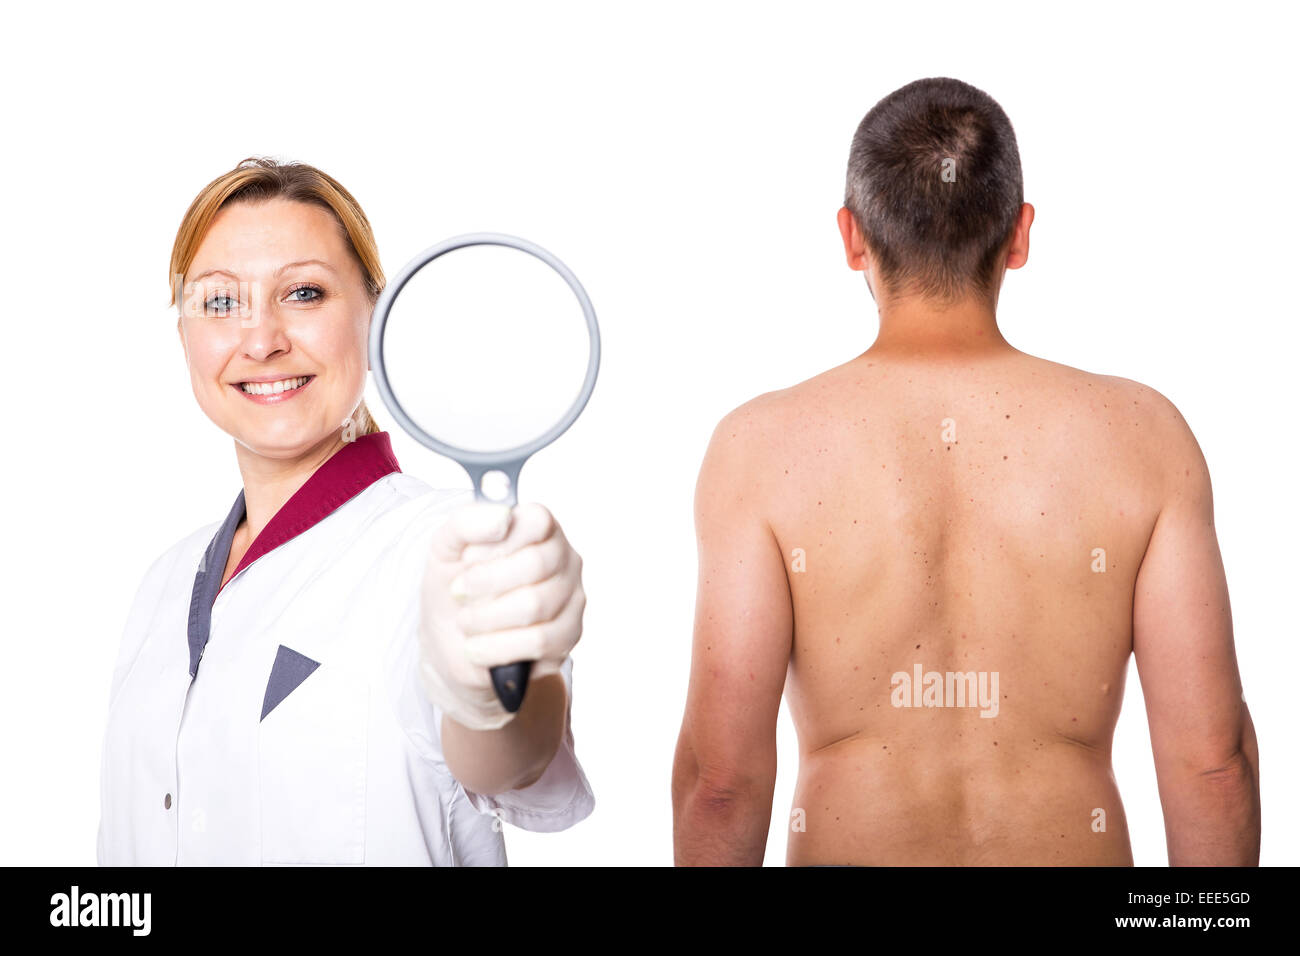 dermatologist with glass and a man Stock Photo